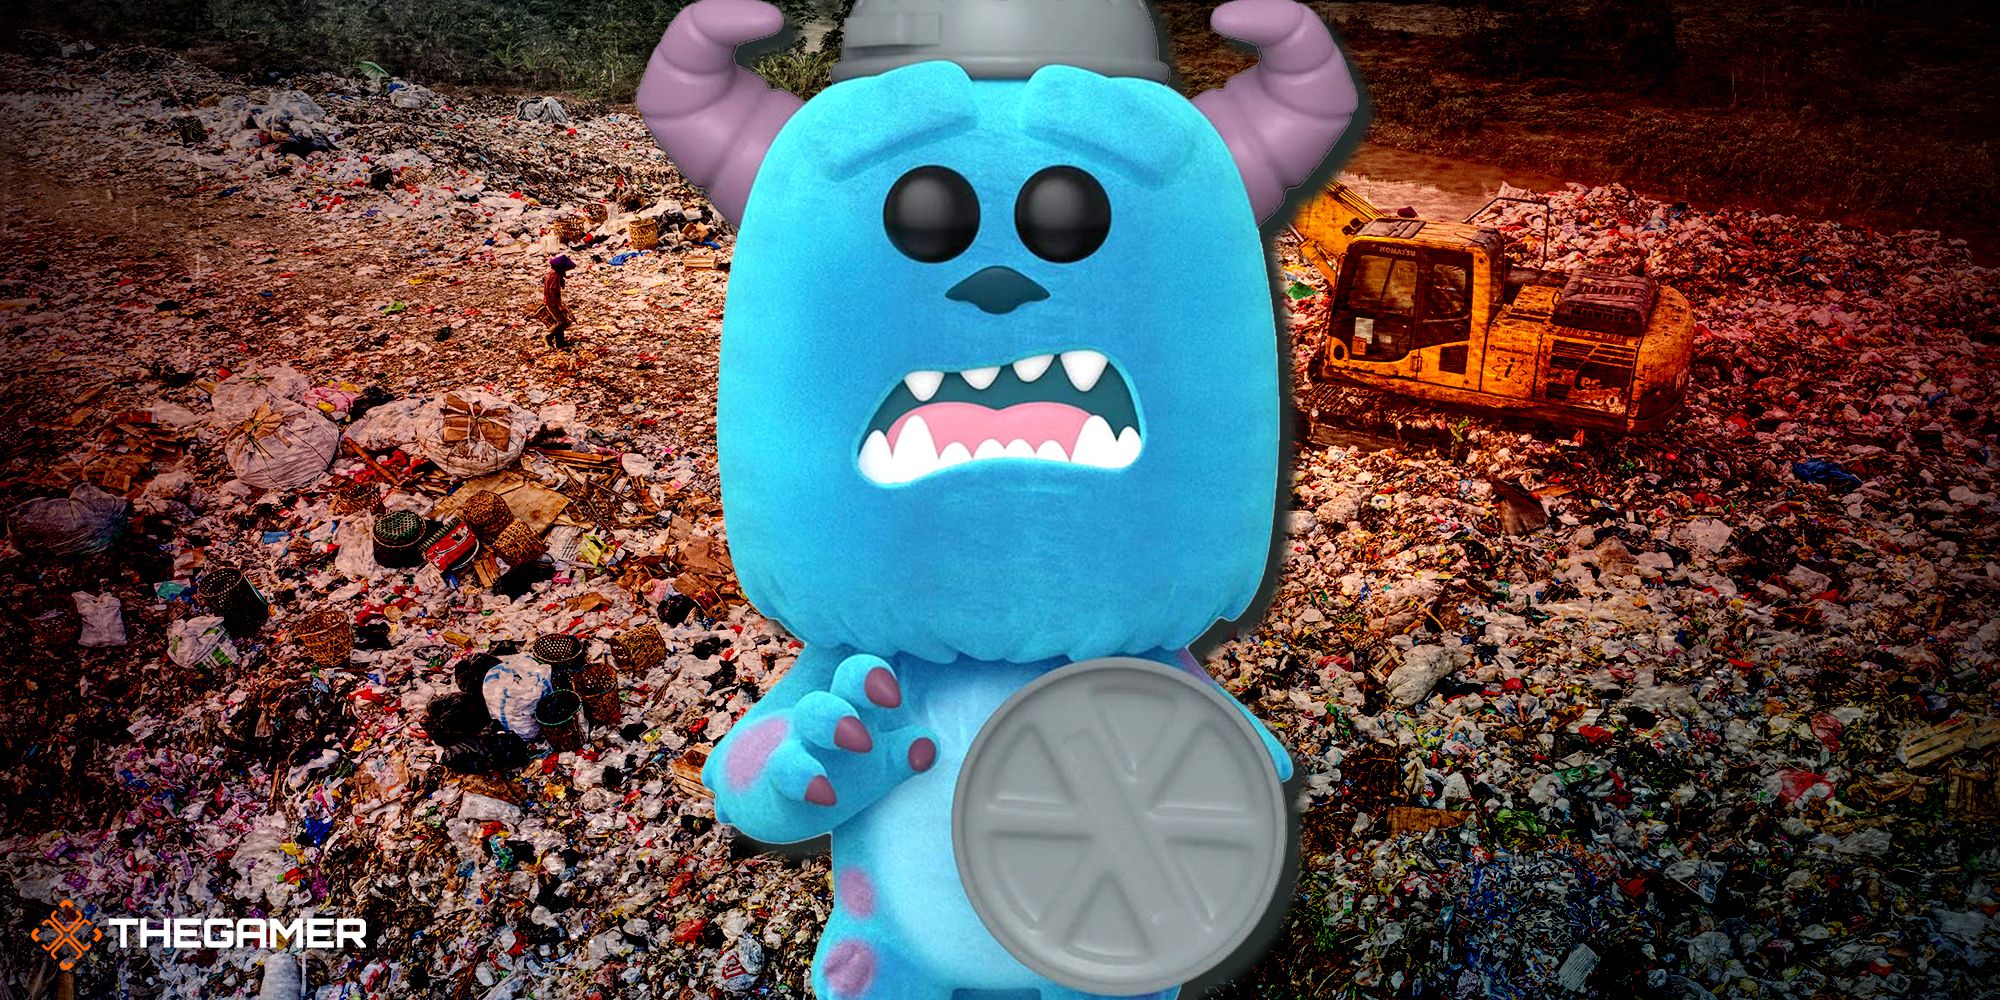  Million Worth Of Funko Pops Are About To Be Dumped In A Landfill